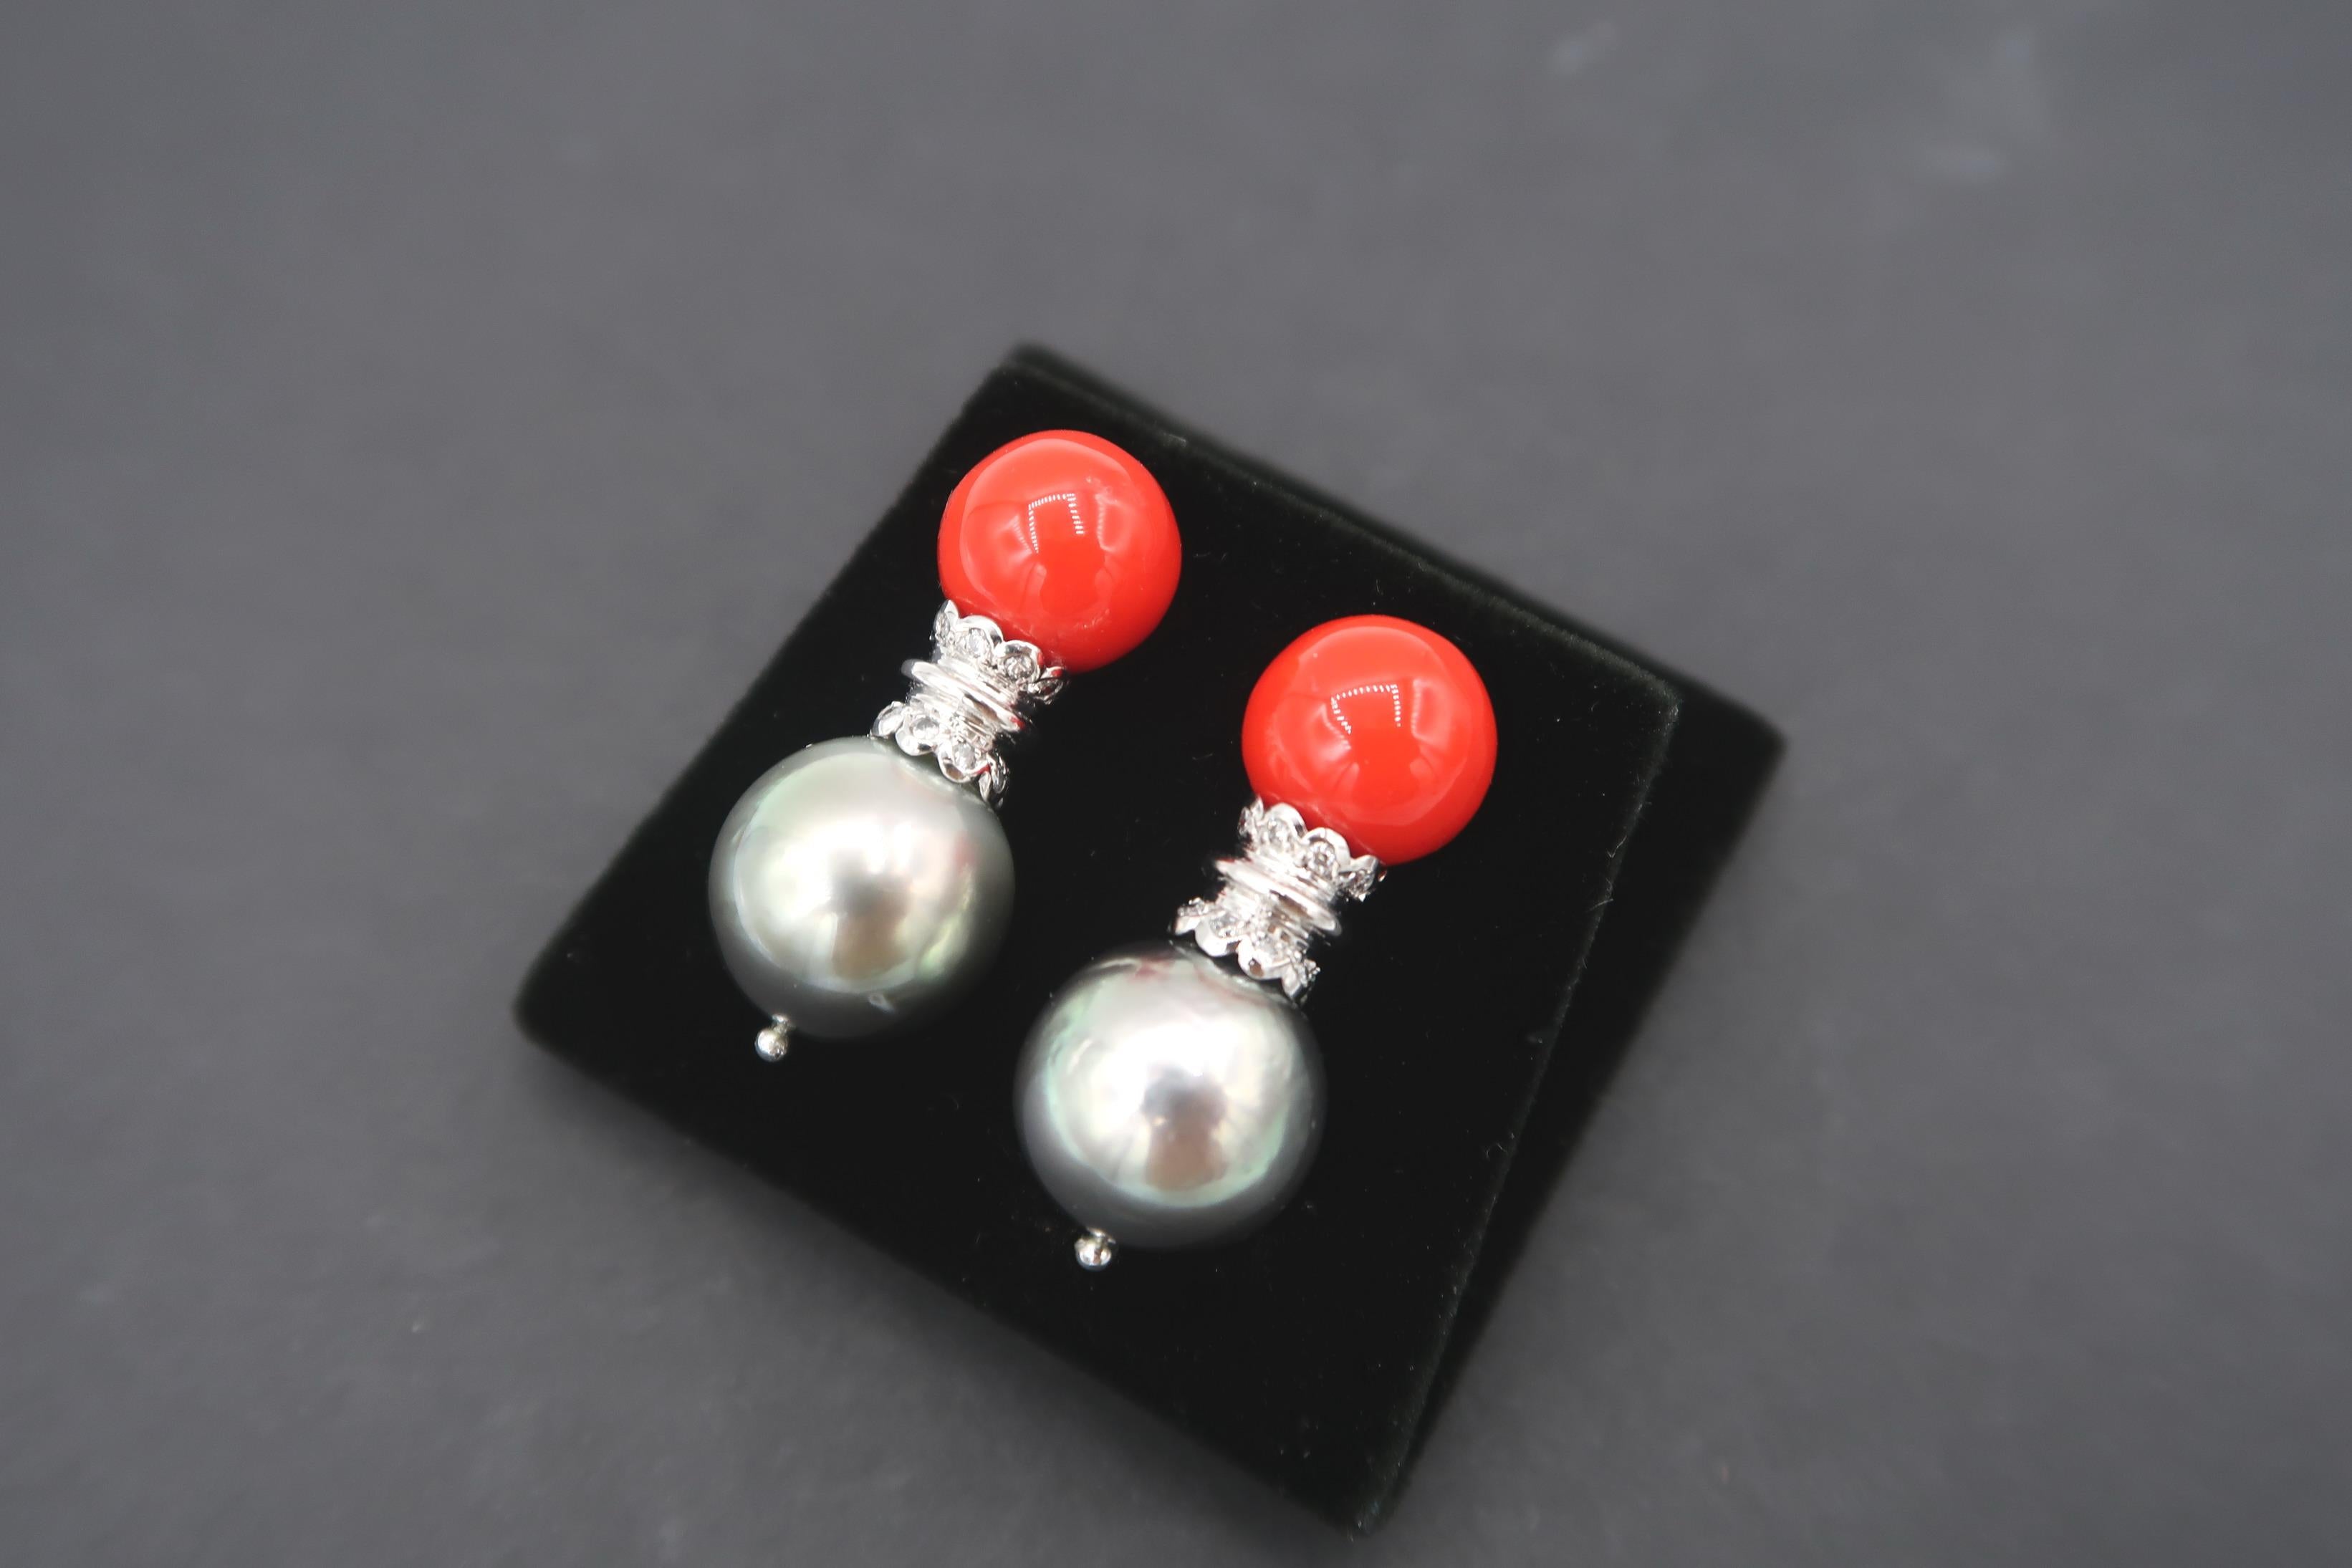 Coral and Tahitian Pearl Sconce Earrings embellished with Diamond in 18K White Gold Setting

Diamond: 0.40ct.
Gold: 18K White Gold 4.56g.
Tahitian Pearls: 12.5mm
Coral